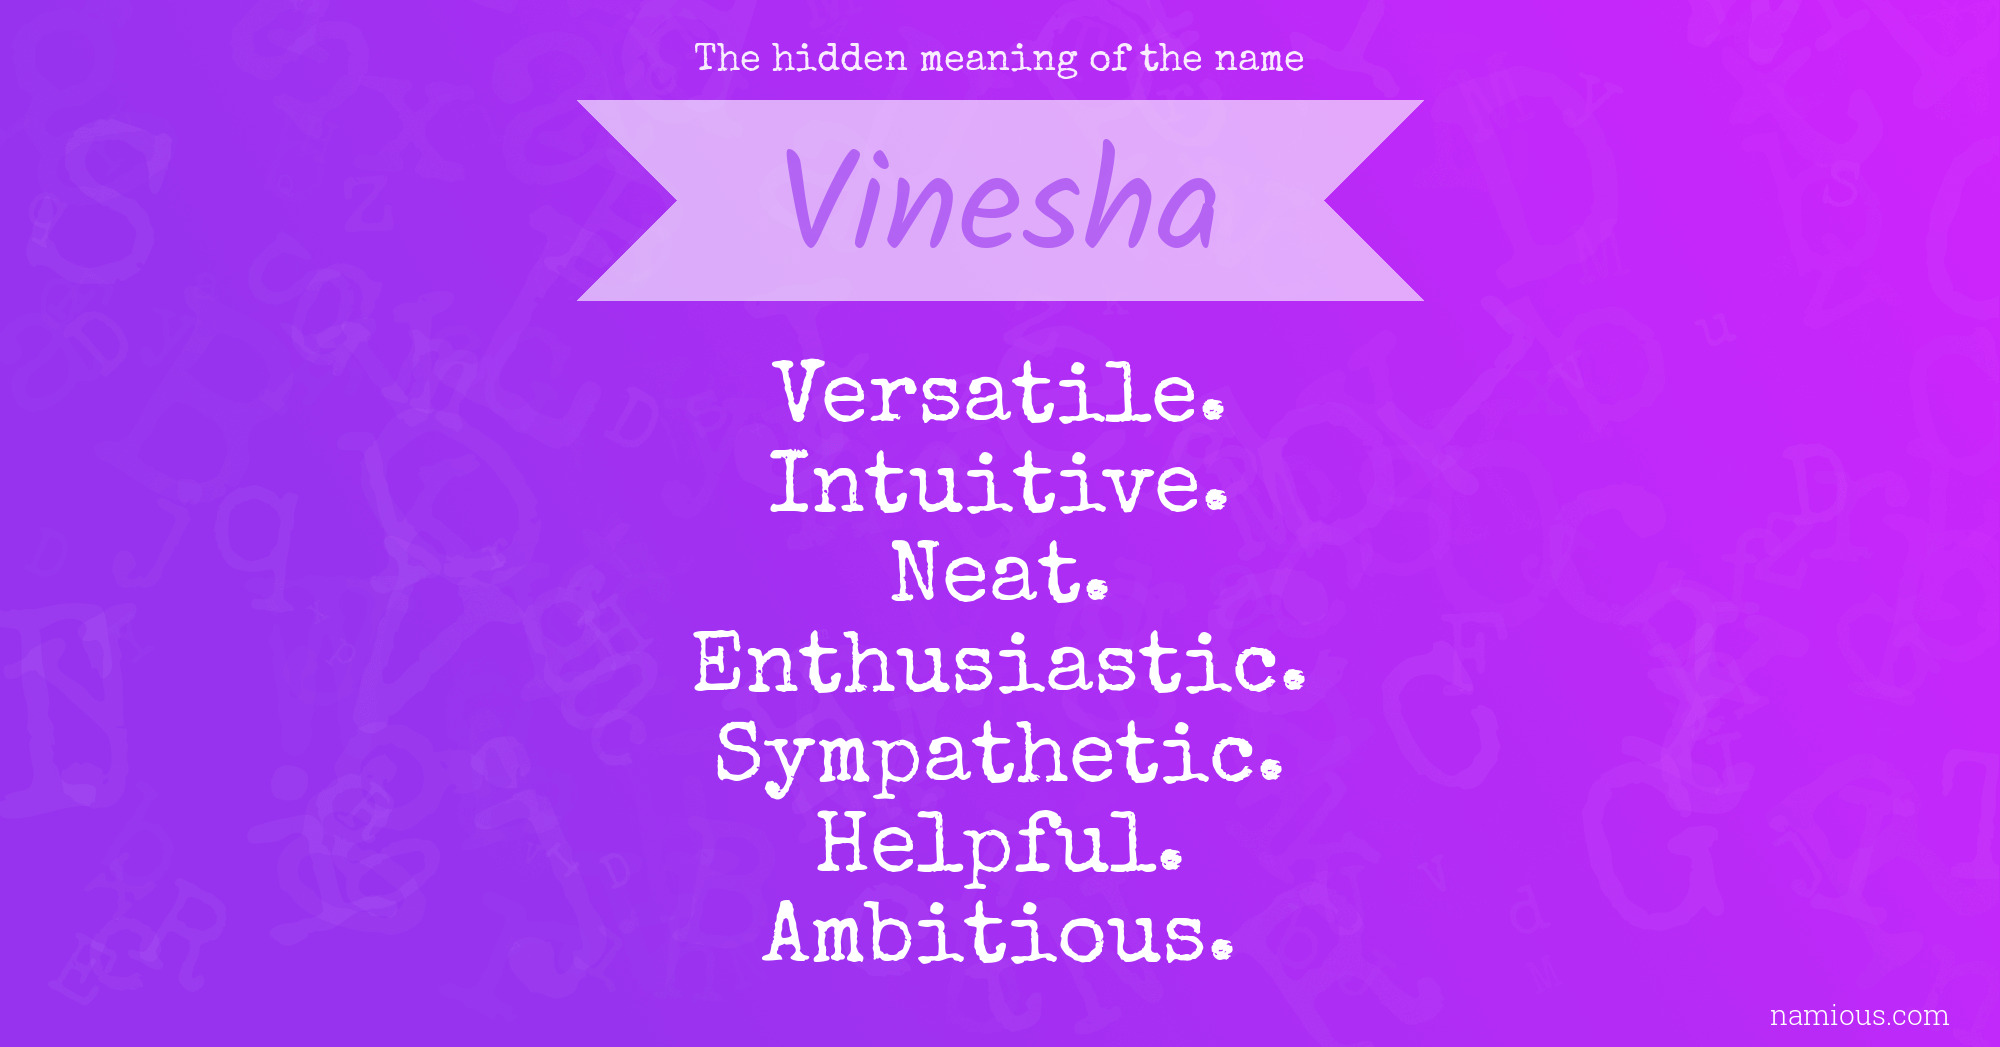 The hidden meaning of the name Vinesha